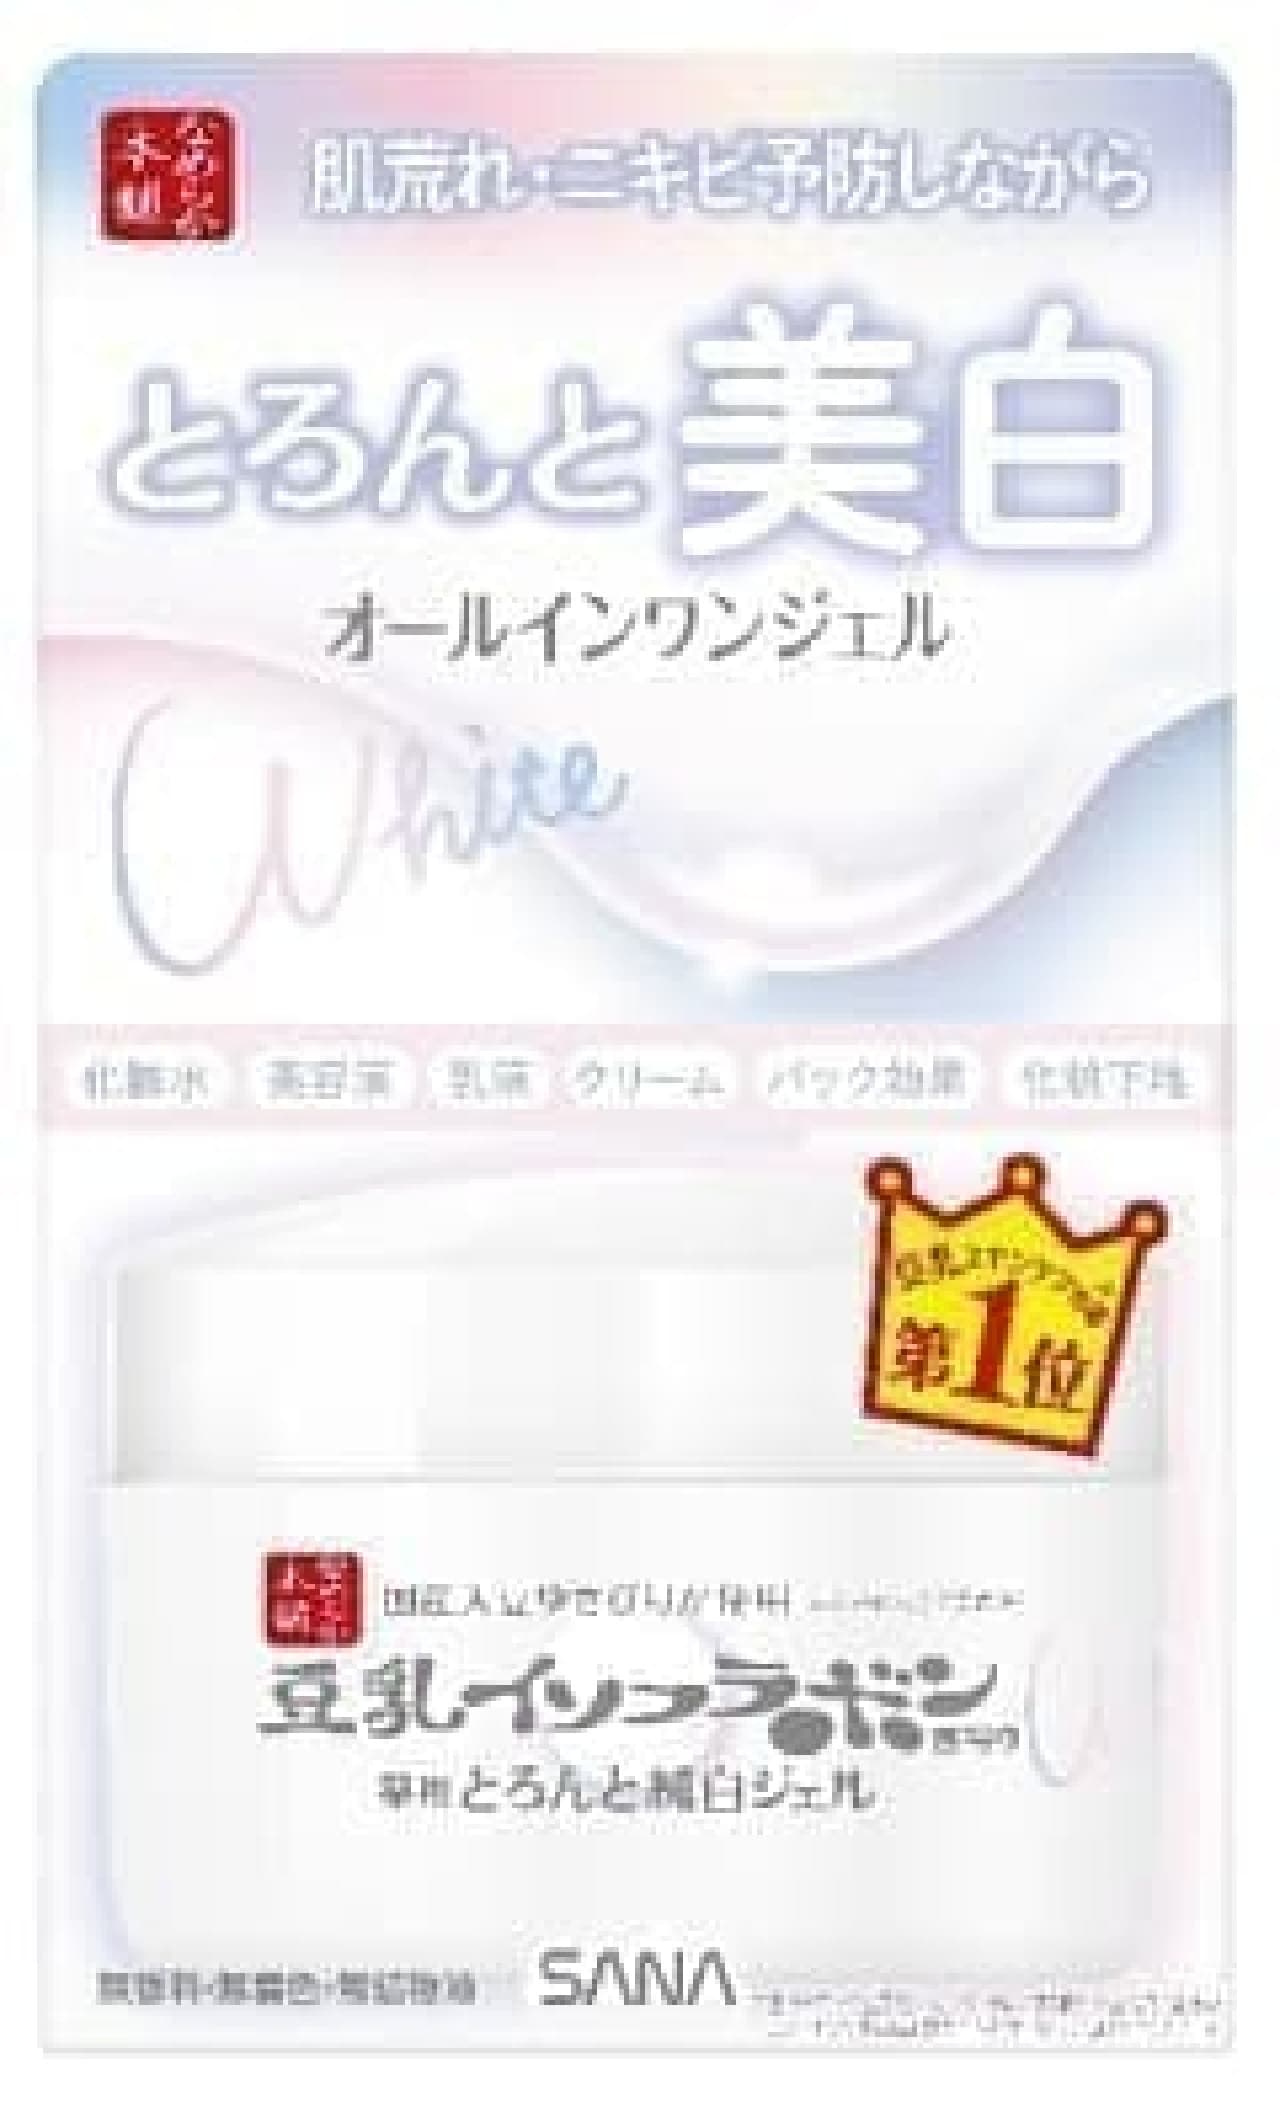 Sana Smooth Honpo Toronto Concentrated Gel Medicinal Whitening